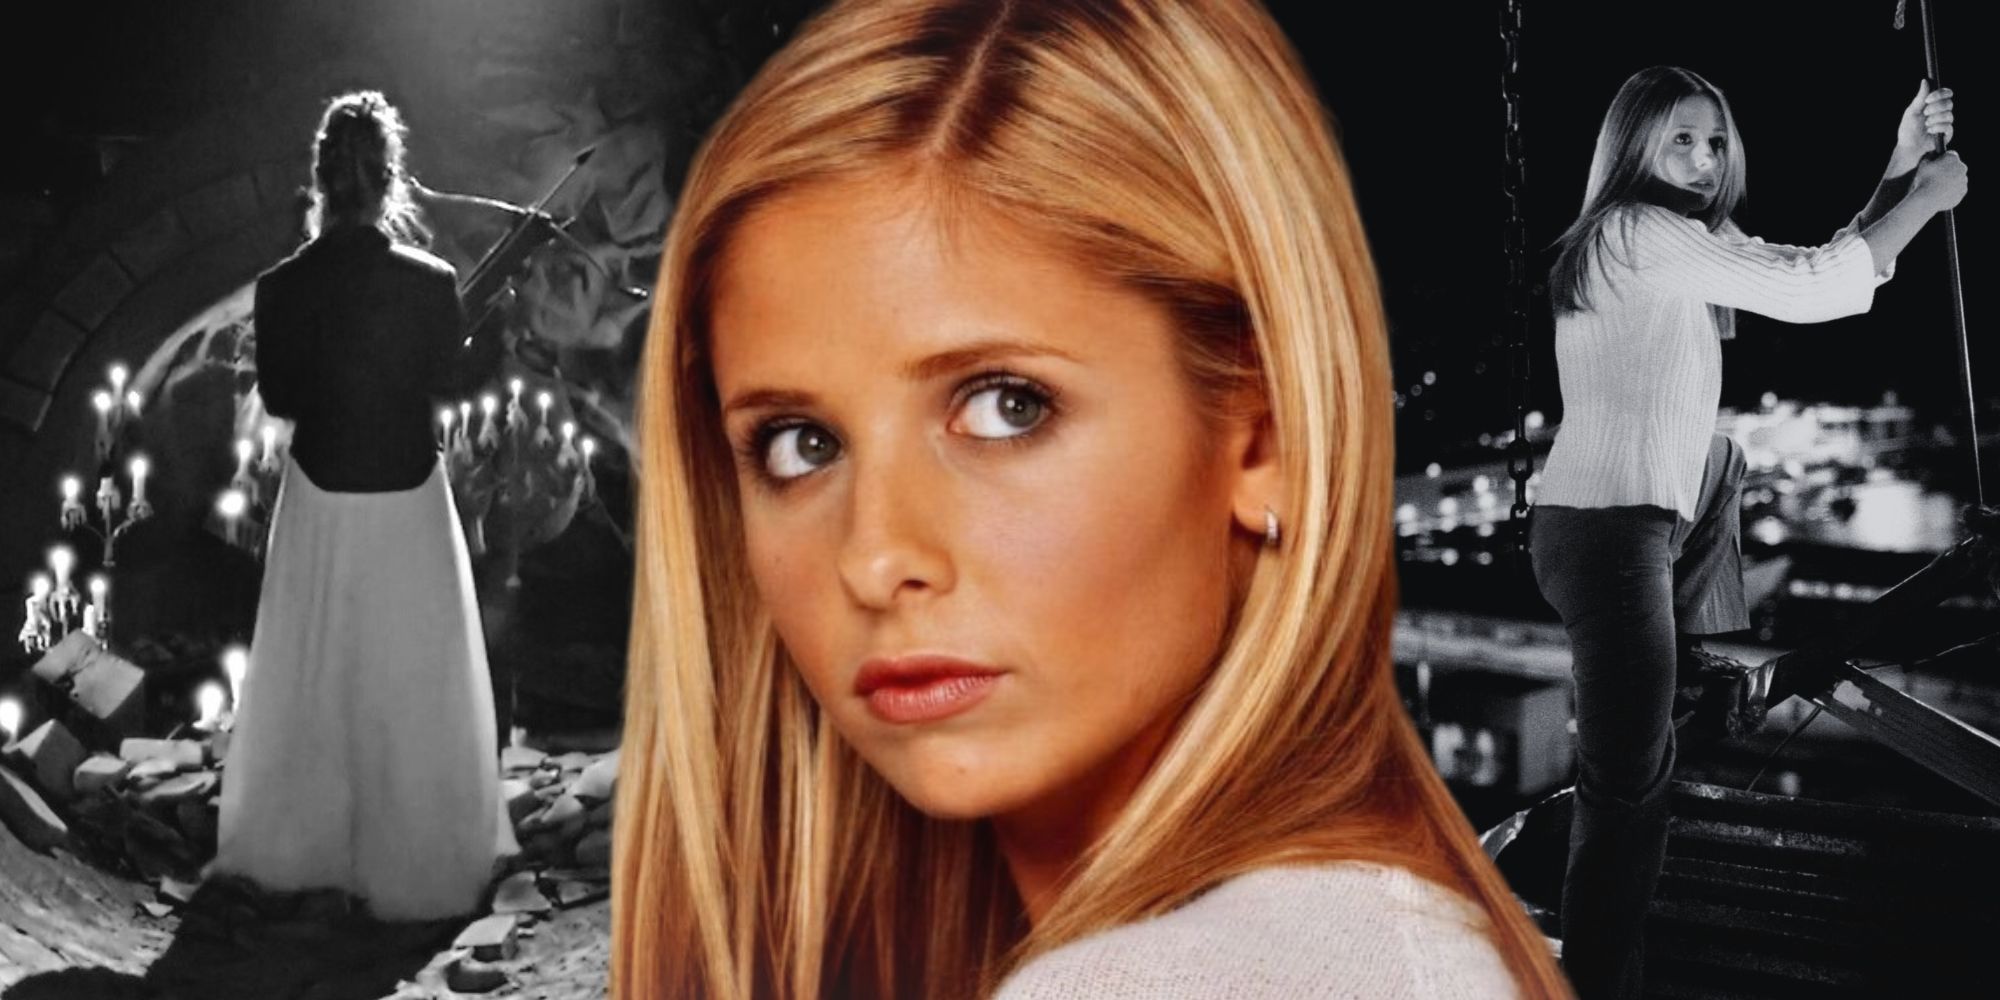 Three images of Buffy from Buffy the Vampire Slayer